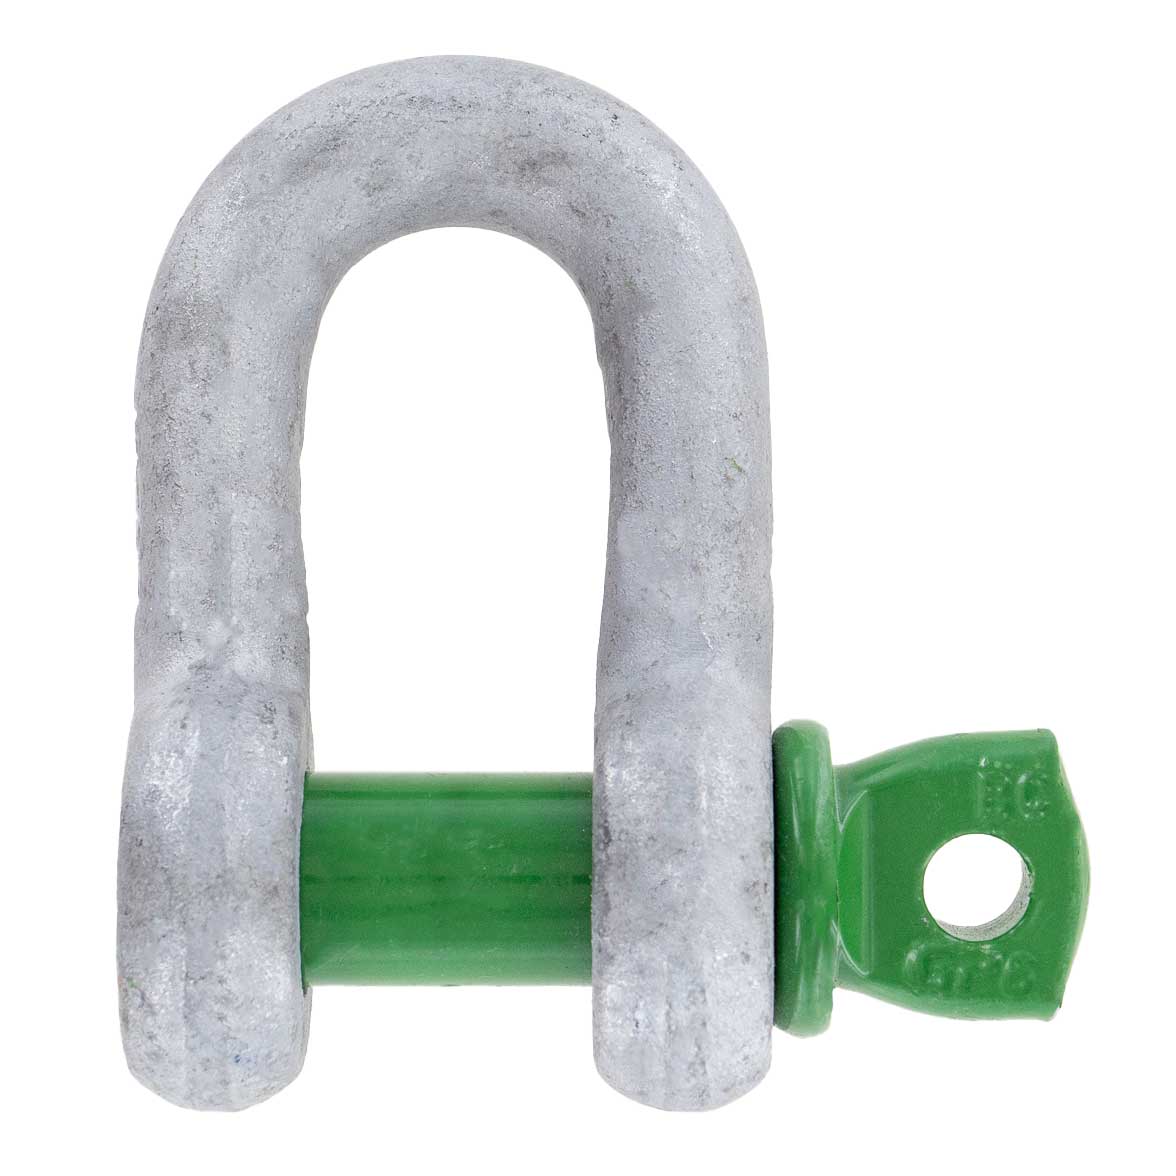 5/8" Van Beest Green Pin® Screw Pin Chain Shackle | G-4151 - 3.25 Ton primary image